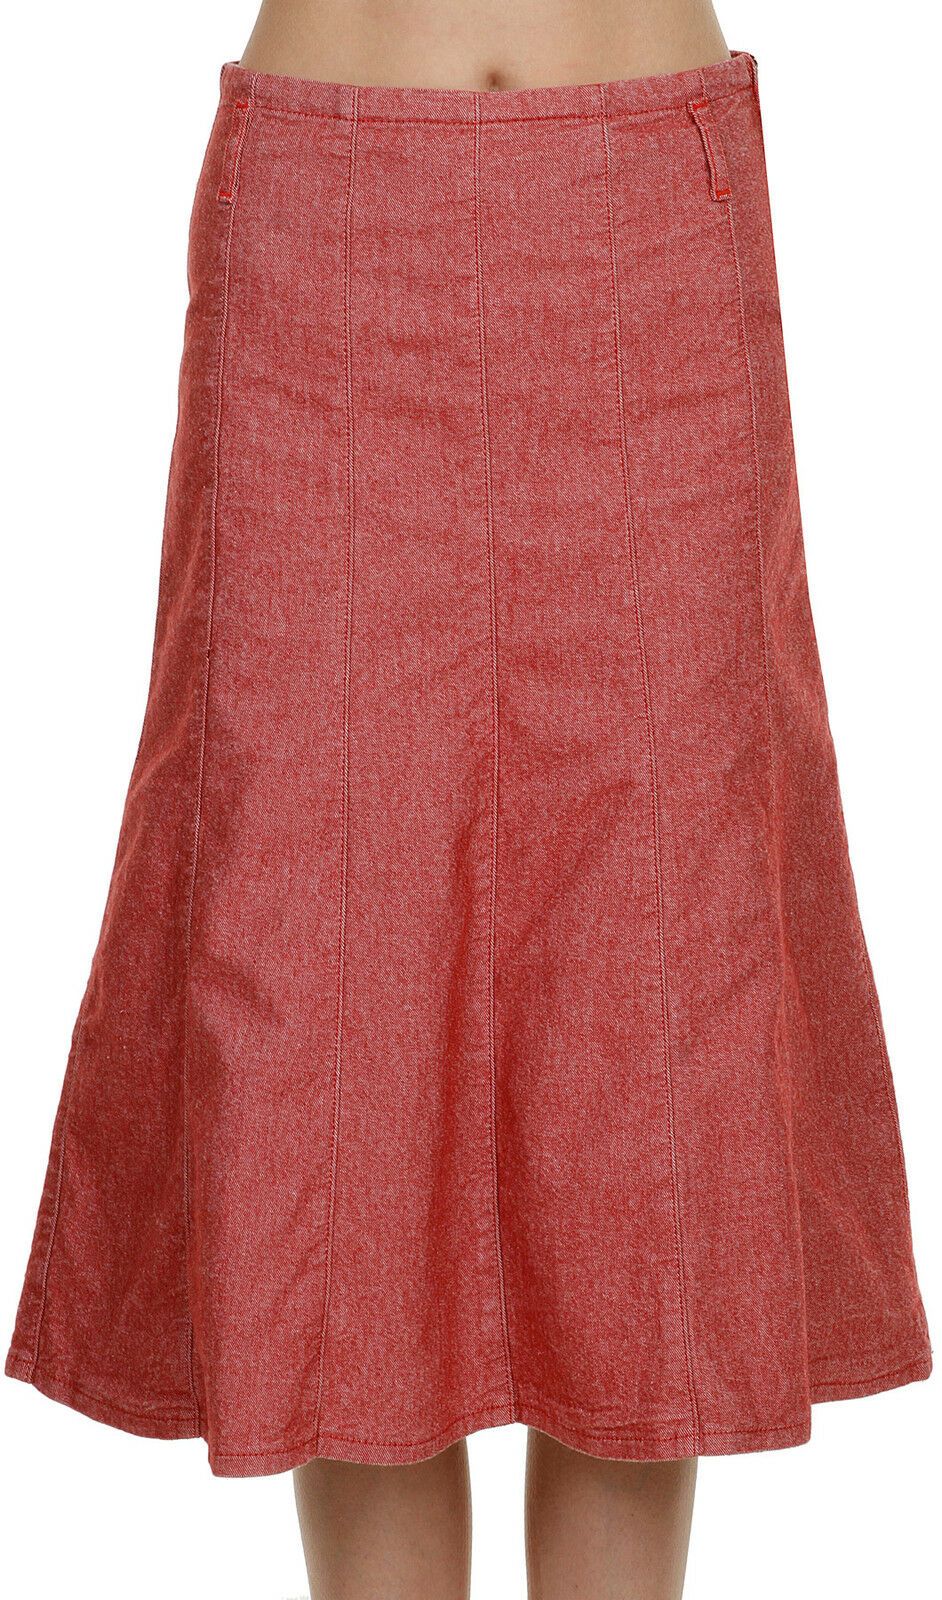 Close view of red panelled skirt with stretchy denim and belt loops showing that it sits below the waist. 